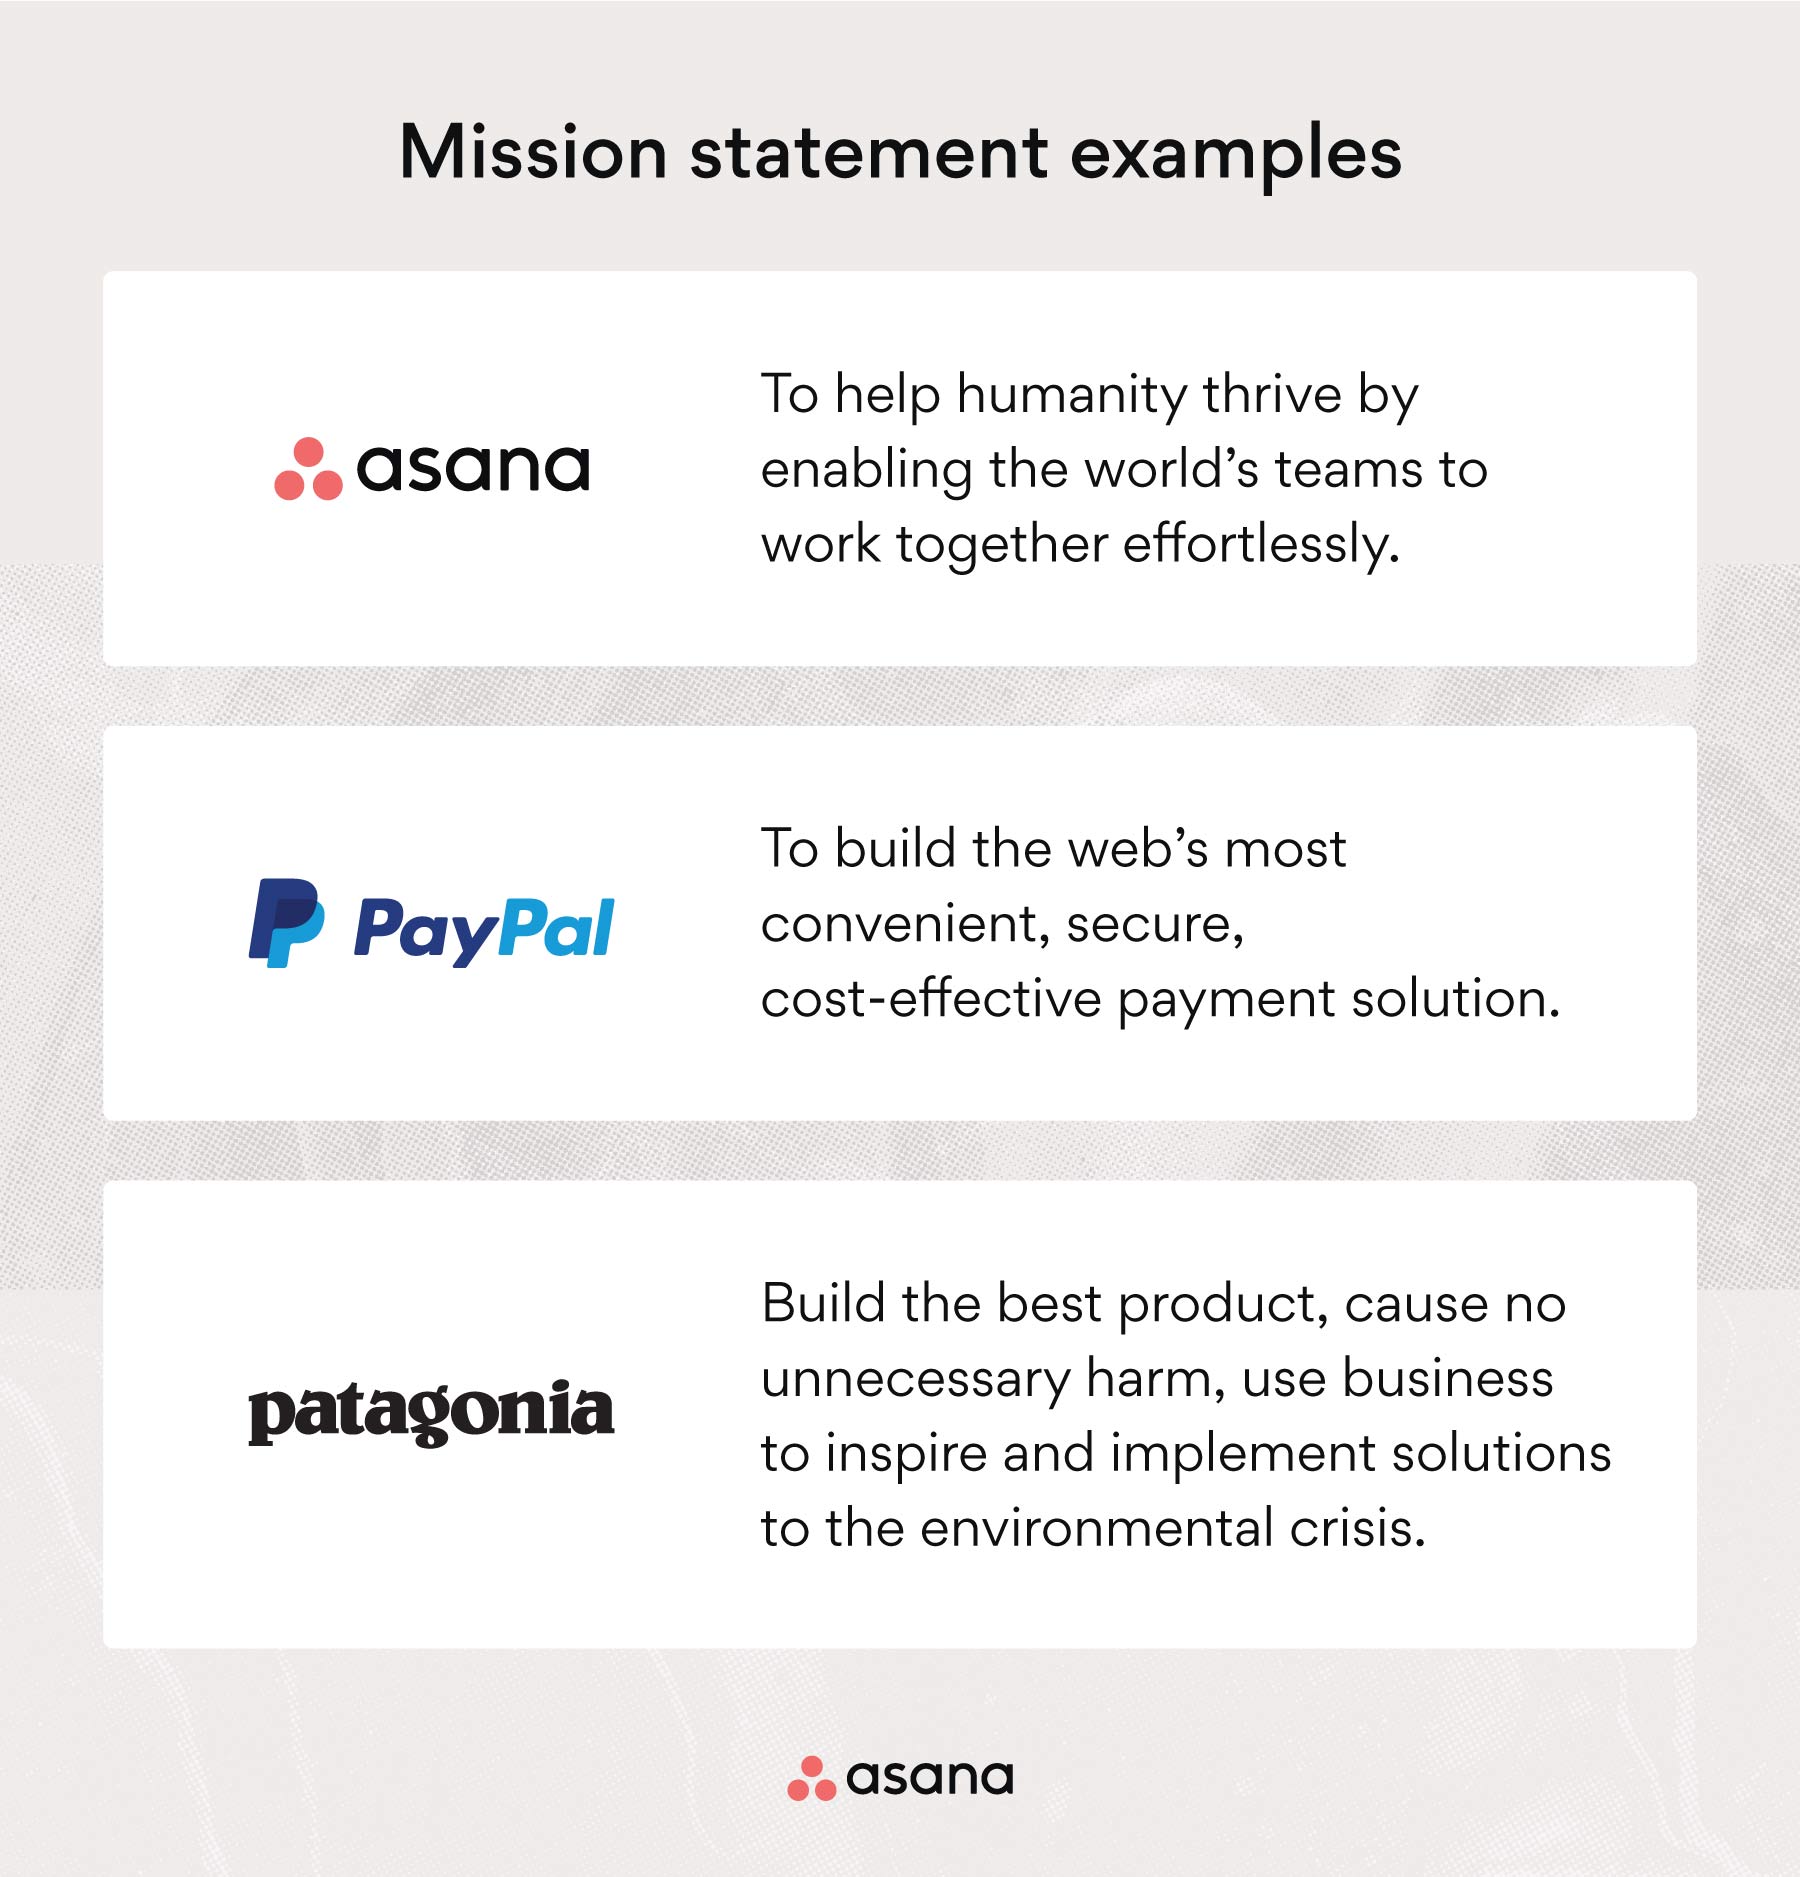 [Inline illustration] Mission statement examples: Asana, Paypal, Patagonia (Example)